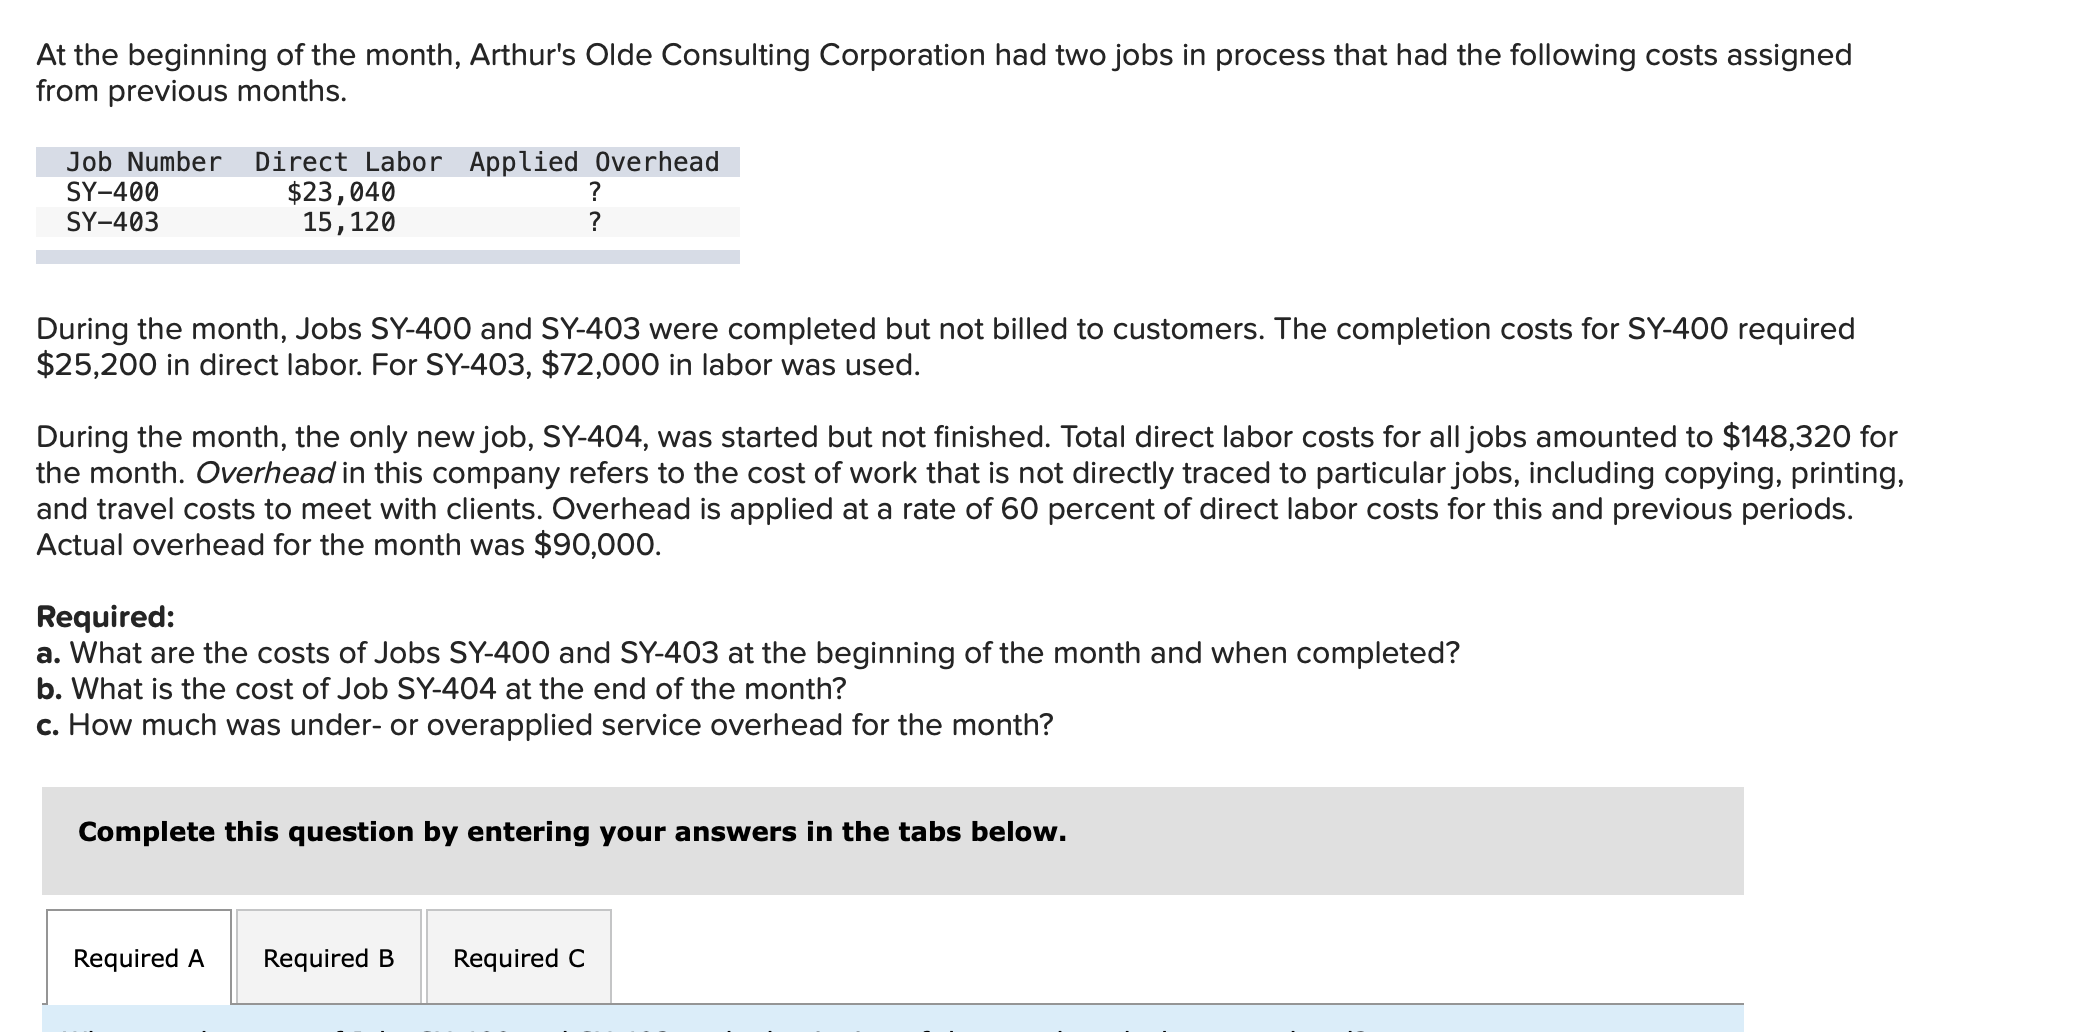 At the beginning of the month, Arthur's Olde Consulting Corporation had two jobs in process that had the following costs assigned
from previous months.
Job Number
SY-400
SY-403
Direct Labor Applied Overhead
$23,040
15,120
?
?
During the month, Jobs SY-400 and SY-403 were completed but not billed to customers. The completion costs for SY-400 required
$25,200 in direct labor. For SY-403, $72,000 in labor was used.
During the month, the only new job, SY-404, was started but not finished. Total direct labor costs for all jobs amounted to $148,320 for
the month. Overhead in this company refers to the cost of work that is not directly traced to particular jobs, including copying, printing,
and travel costs to meet with clients. Overhead is applied at a rate of 60 percent of direct labor costs for this and previous periods.
Actual overhead for the month was $90,000.
Required:
a. What are the costs of Jobs SY-400 and SY-403 at the beginning of the month and when completed?
b. What is the cost of Job SY-404 at the end of the month?
c. How much was under- or overapplied service overhead for the month?
